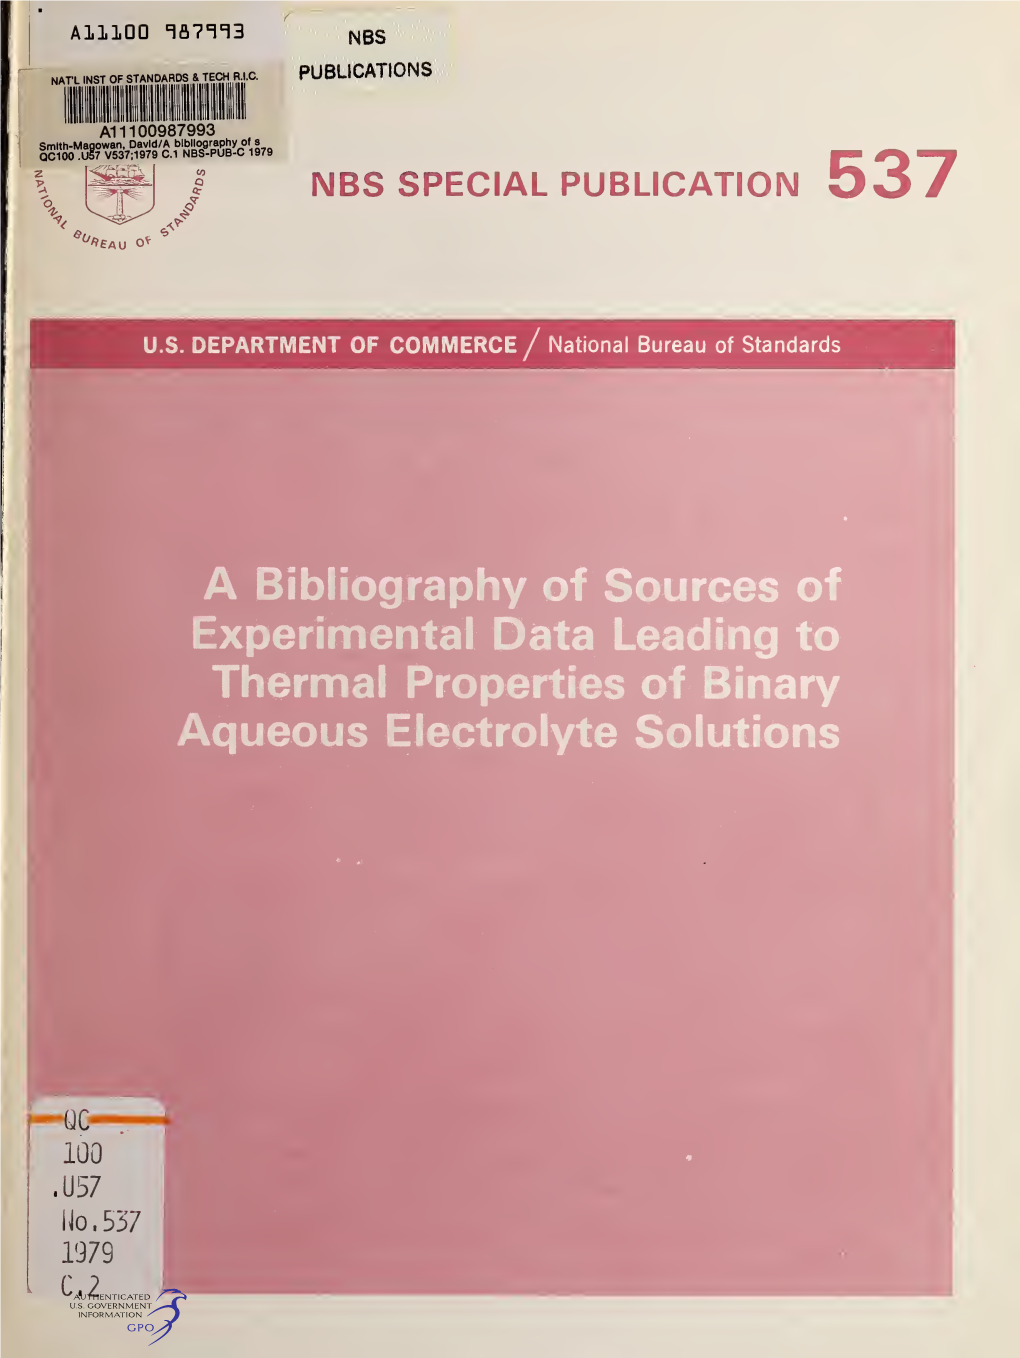 A Bibliography of Sources of Experimental Data Leading to Thermal Properties of Binary Aqueous Electrolyte Solutions